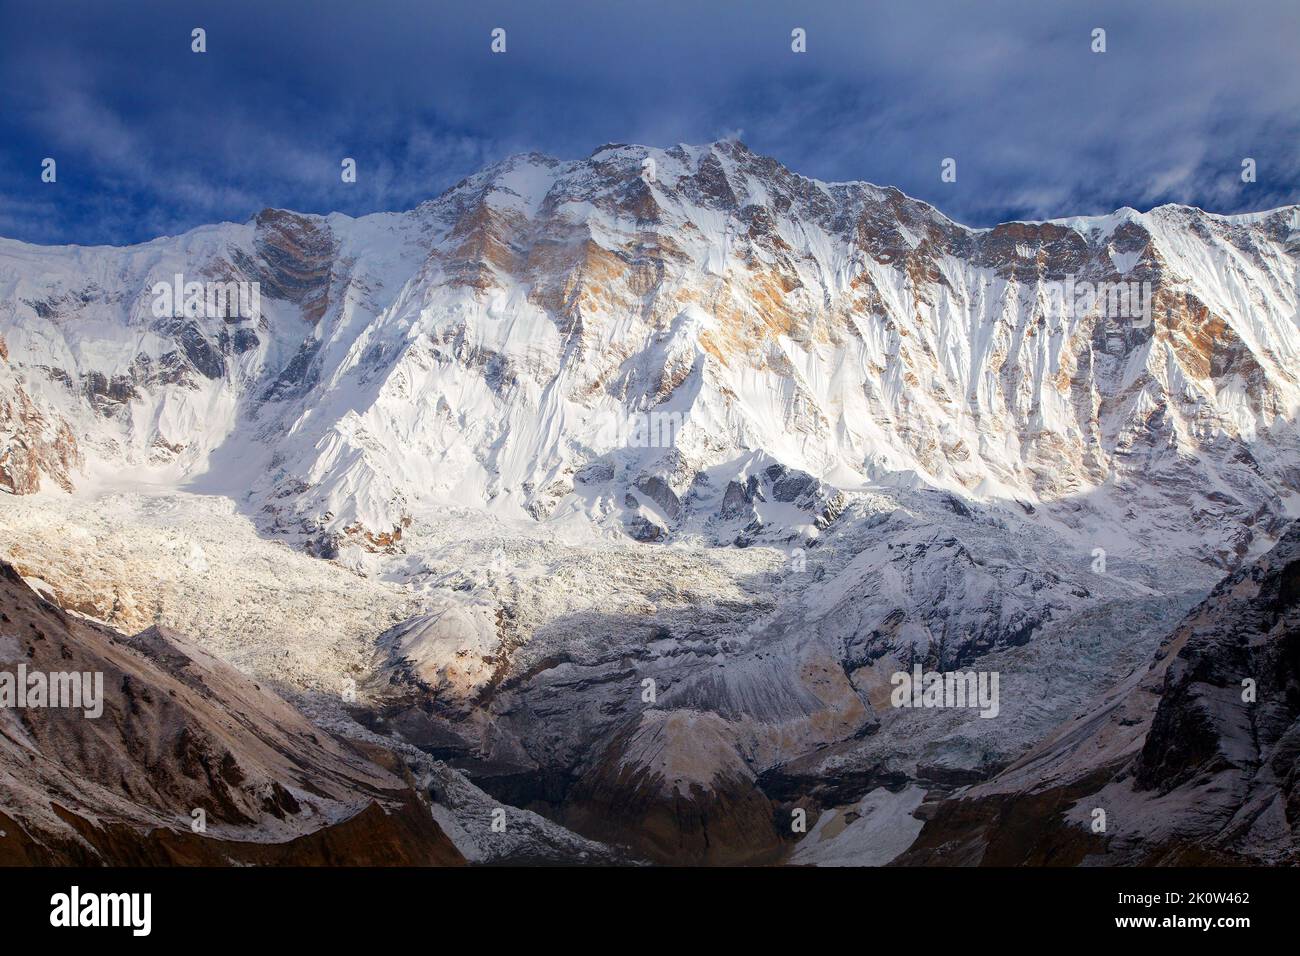 Morning panoramic view of Mount Annapurna from Annapurna south base camp, Nepal Himalayas mountains Stock Photo